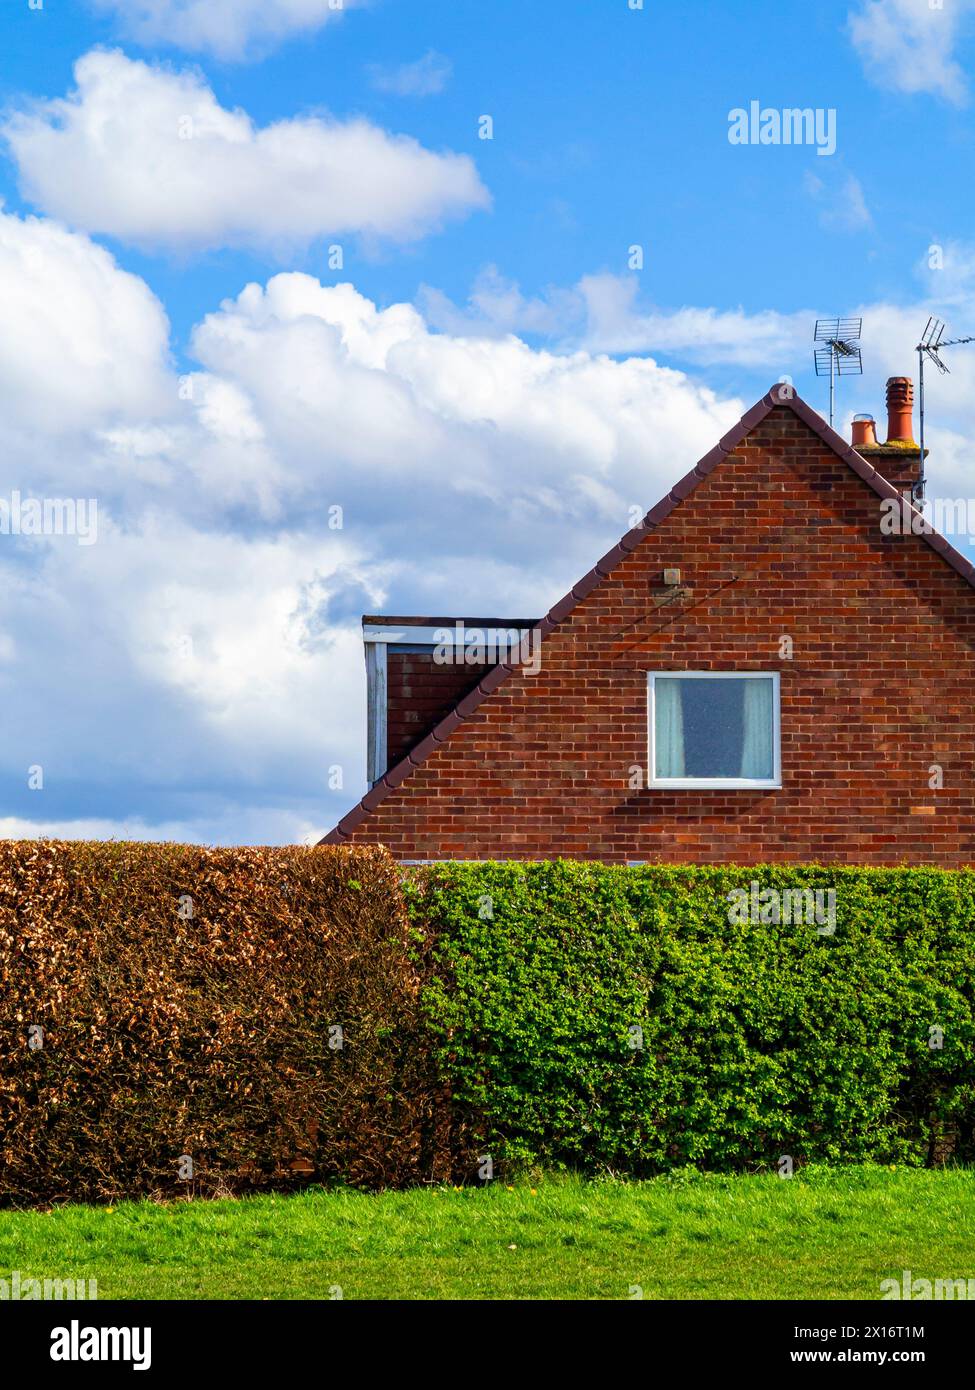 Brick built suburban house with square window and brown and white hedge in the foreground, blue sky with white fluffy clouds in the background. Stock Photo